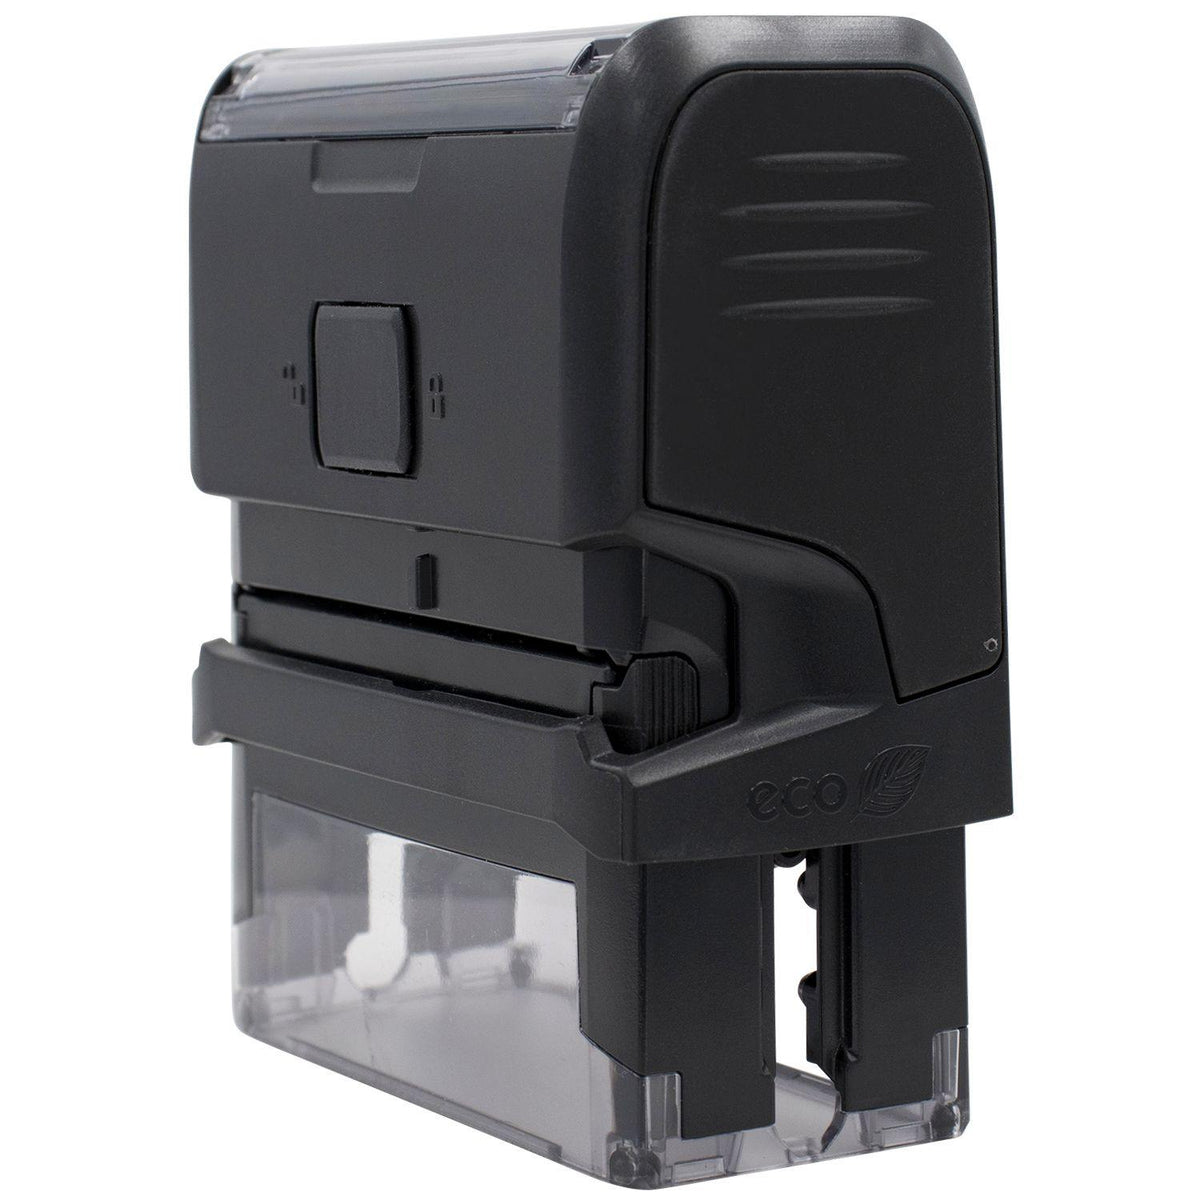 Self Inking Attorneys Copy Stamp - Engineer Seal Stamps - Brand_Trodat, Impression Size_Small, Stamp Type_Self-Inking Stamp, Type of Use_Legal